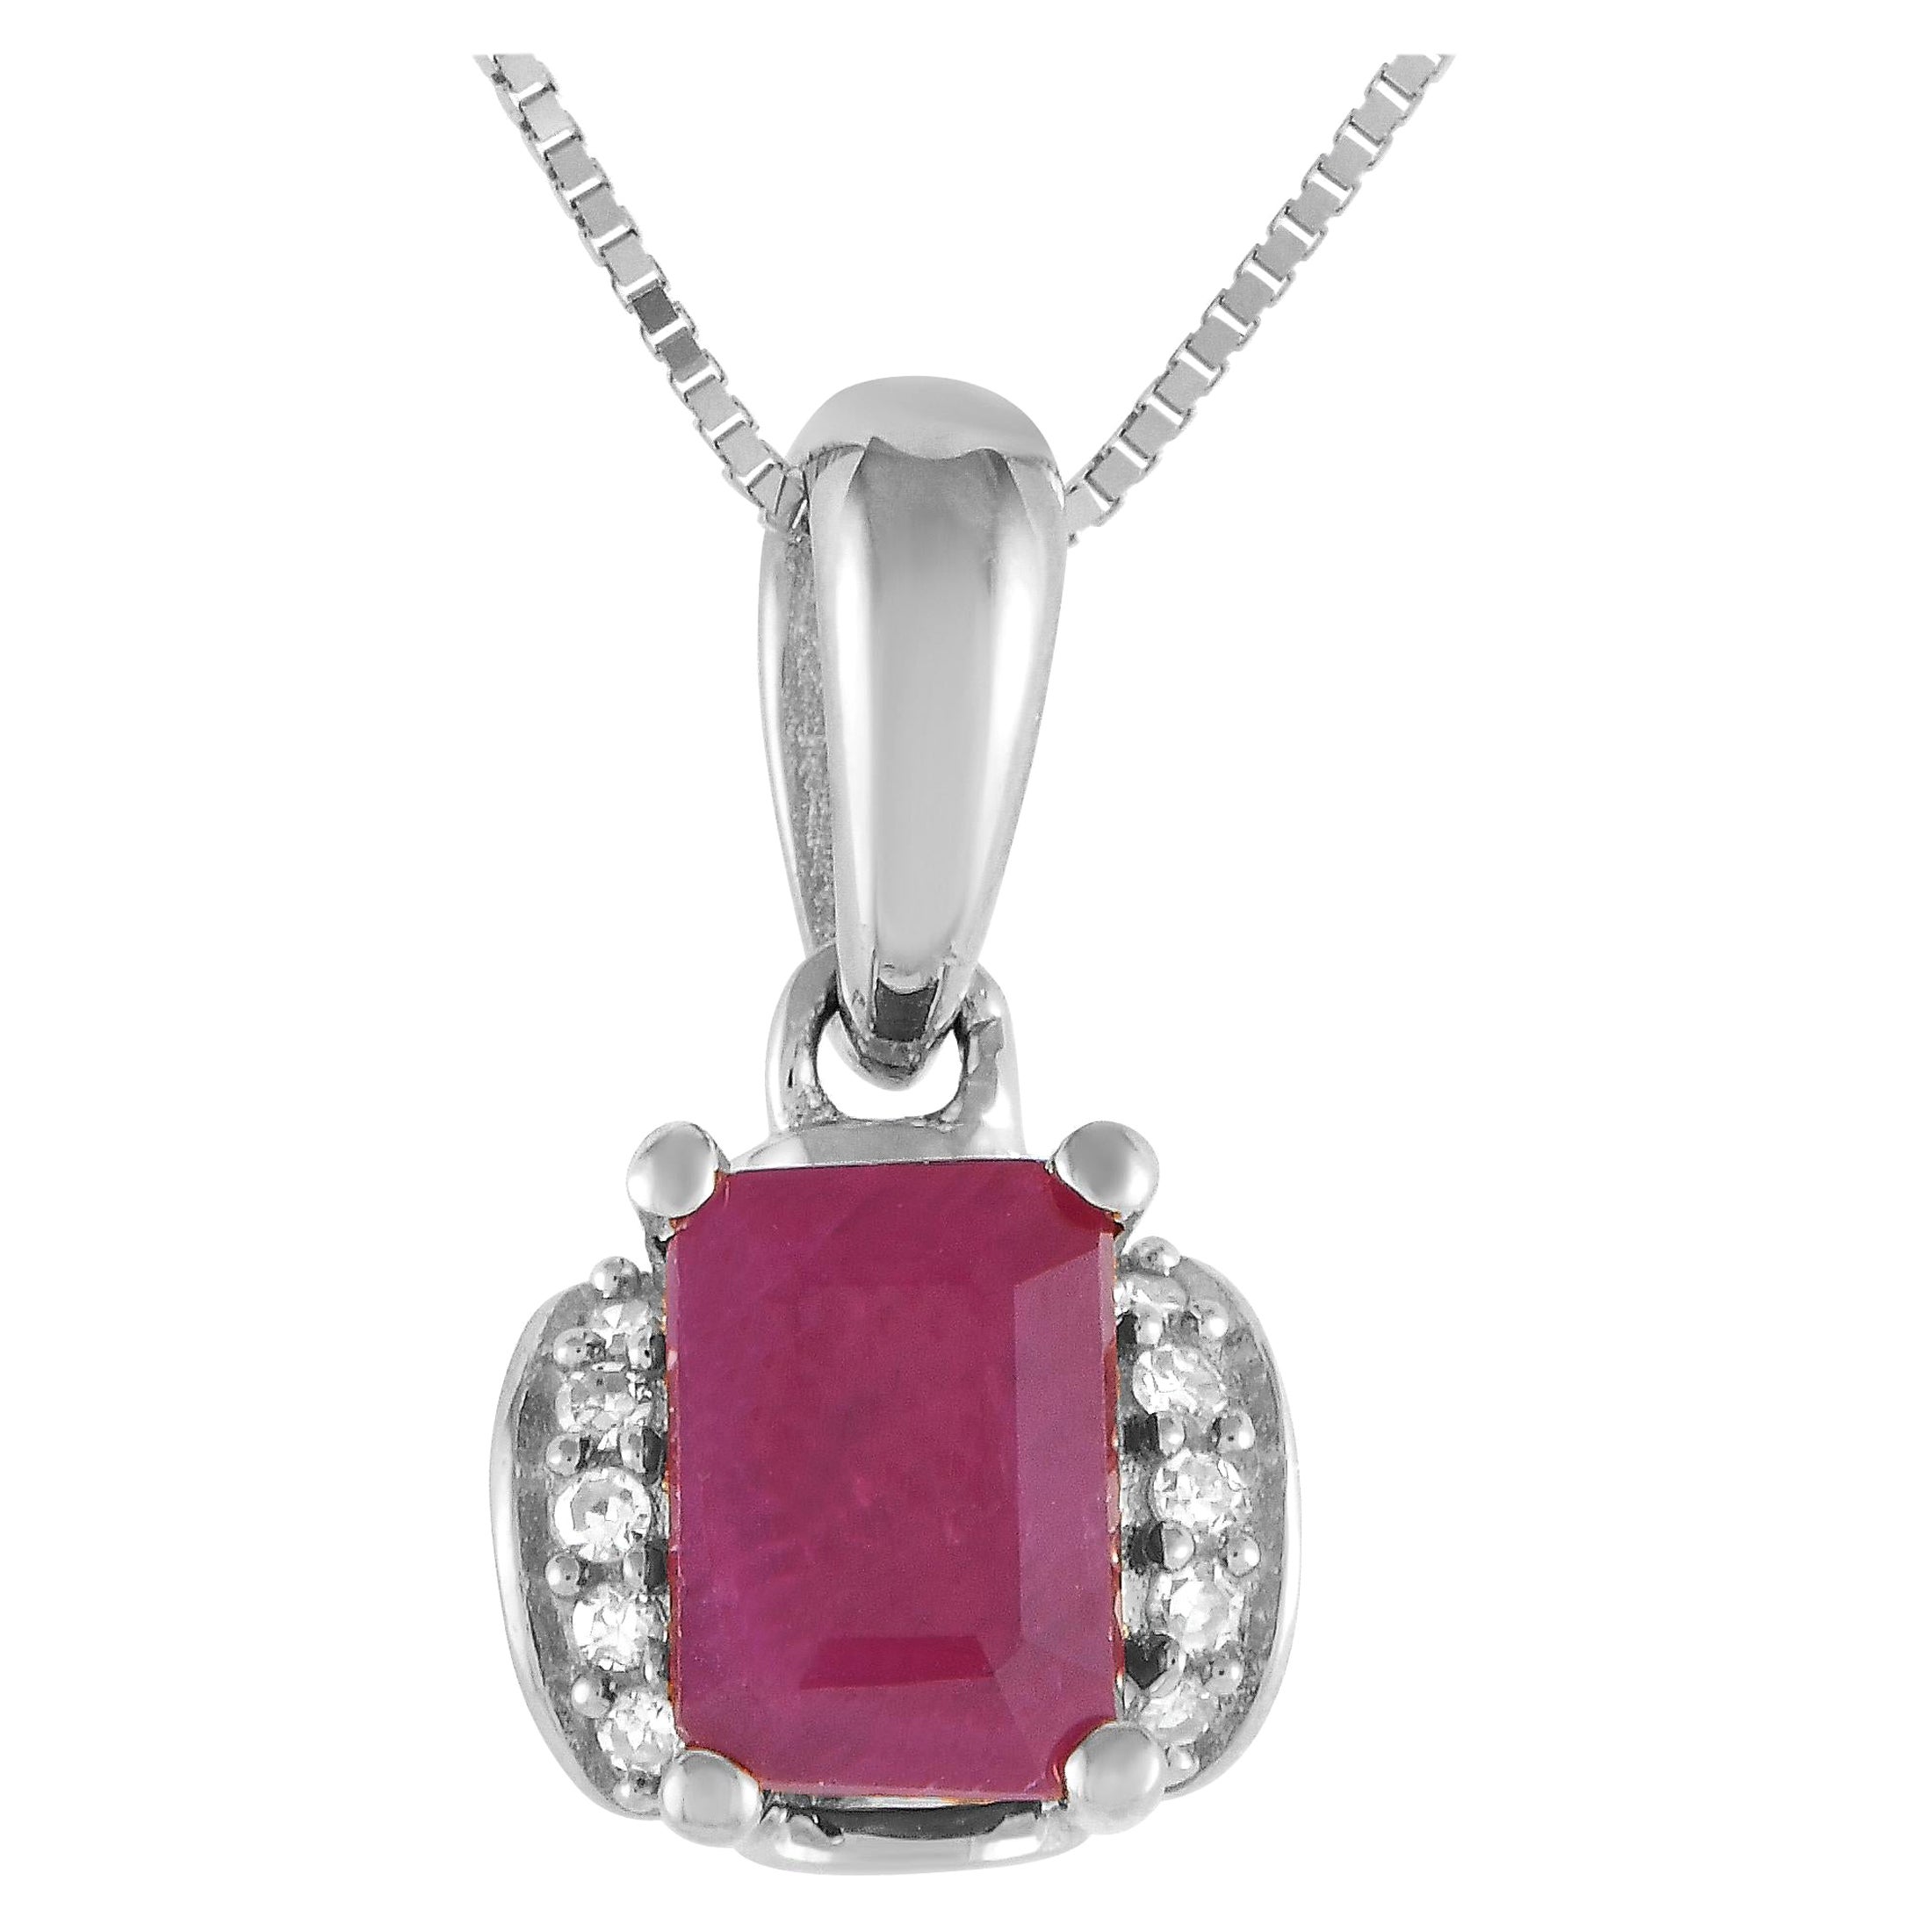 LB Exclusive 14K White Gold 0.03ct Diamond & Ruby Pendant Necklace PD4-16049WRU For Sale